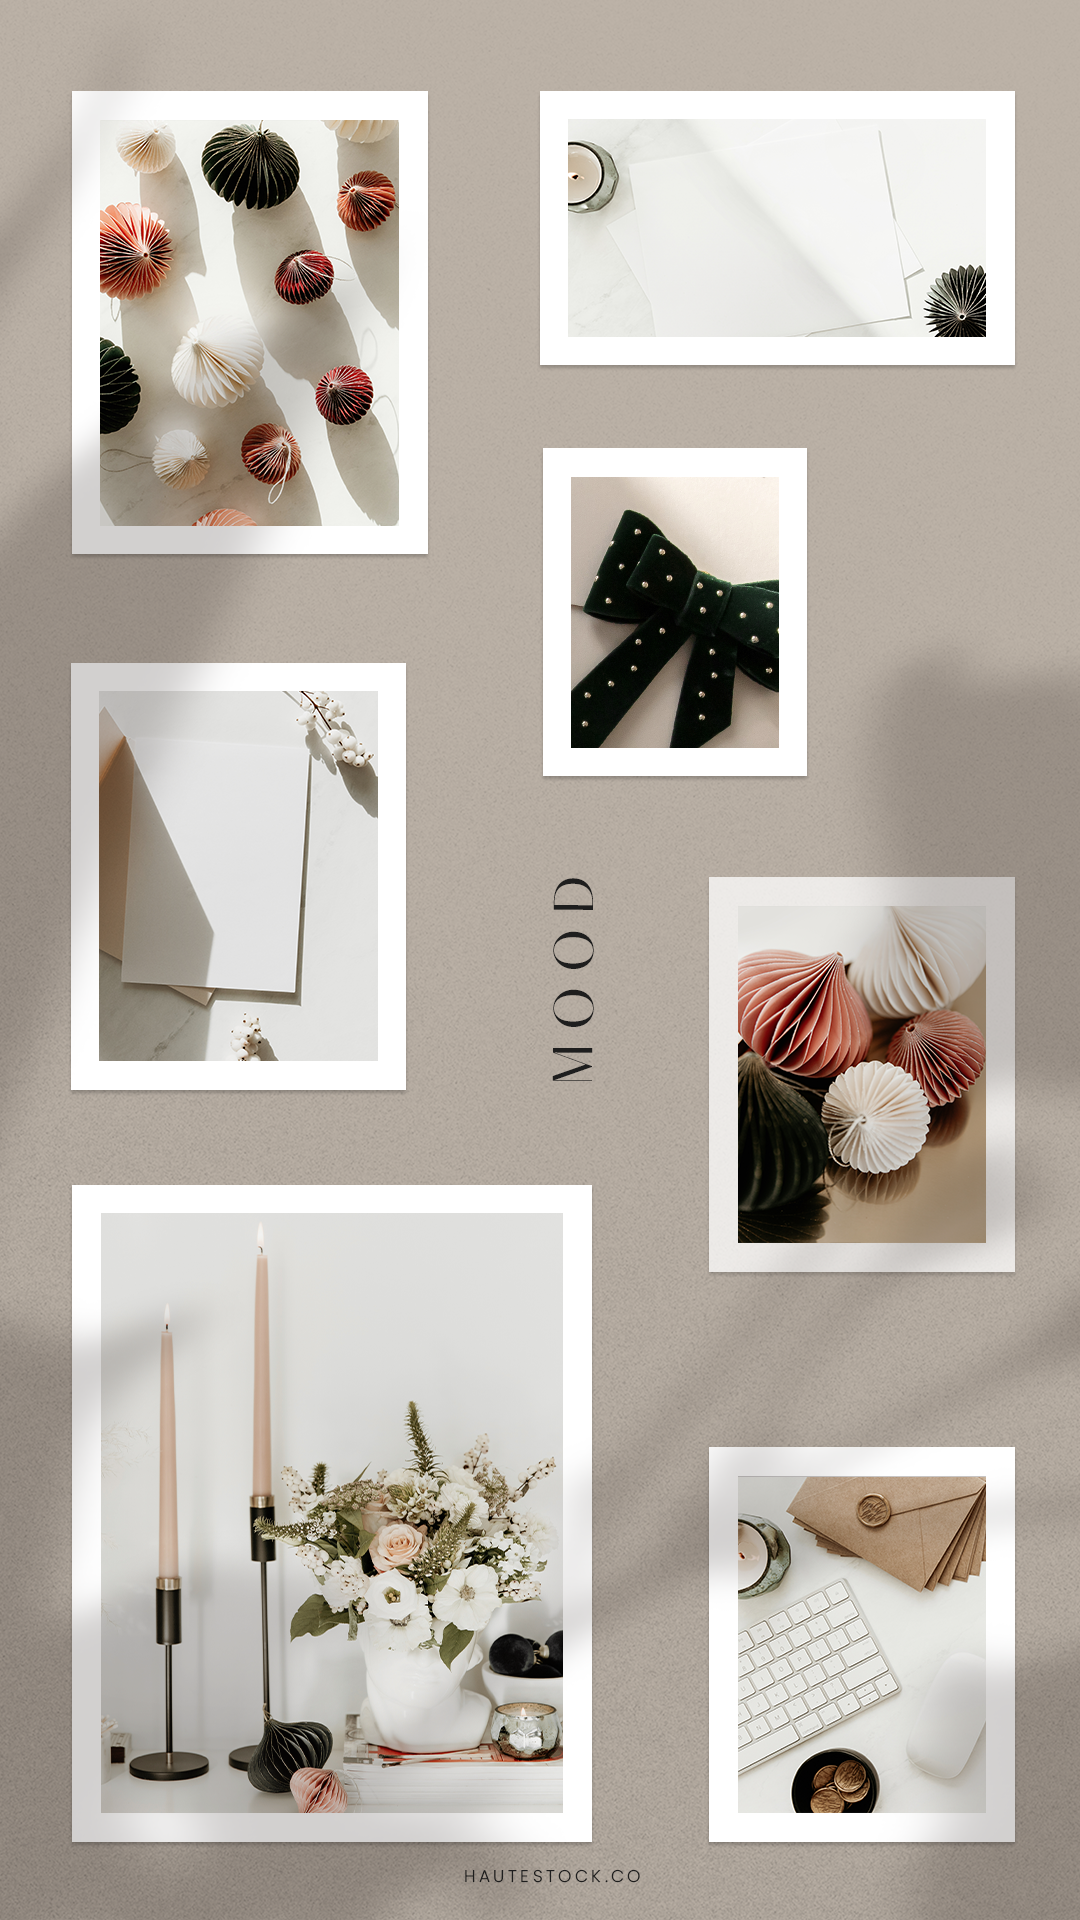 Vintage Holiday Moodboard from Haute Stock. Christmas stock photos in emerald green, dusty rose pink and deep red color palette.